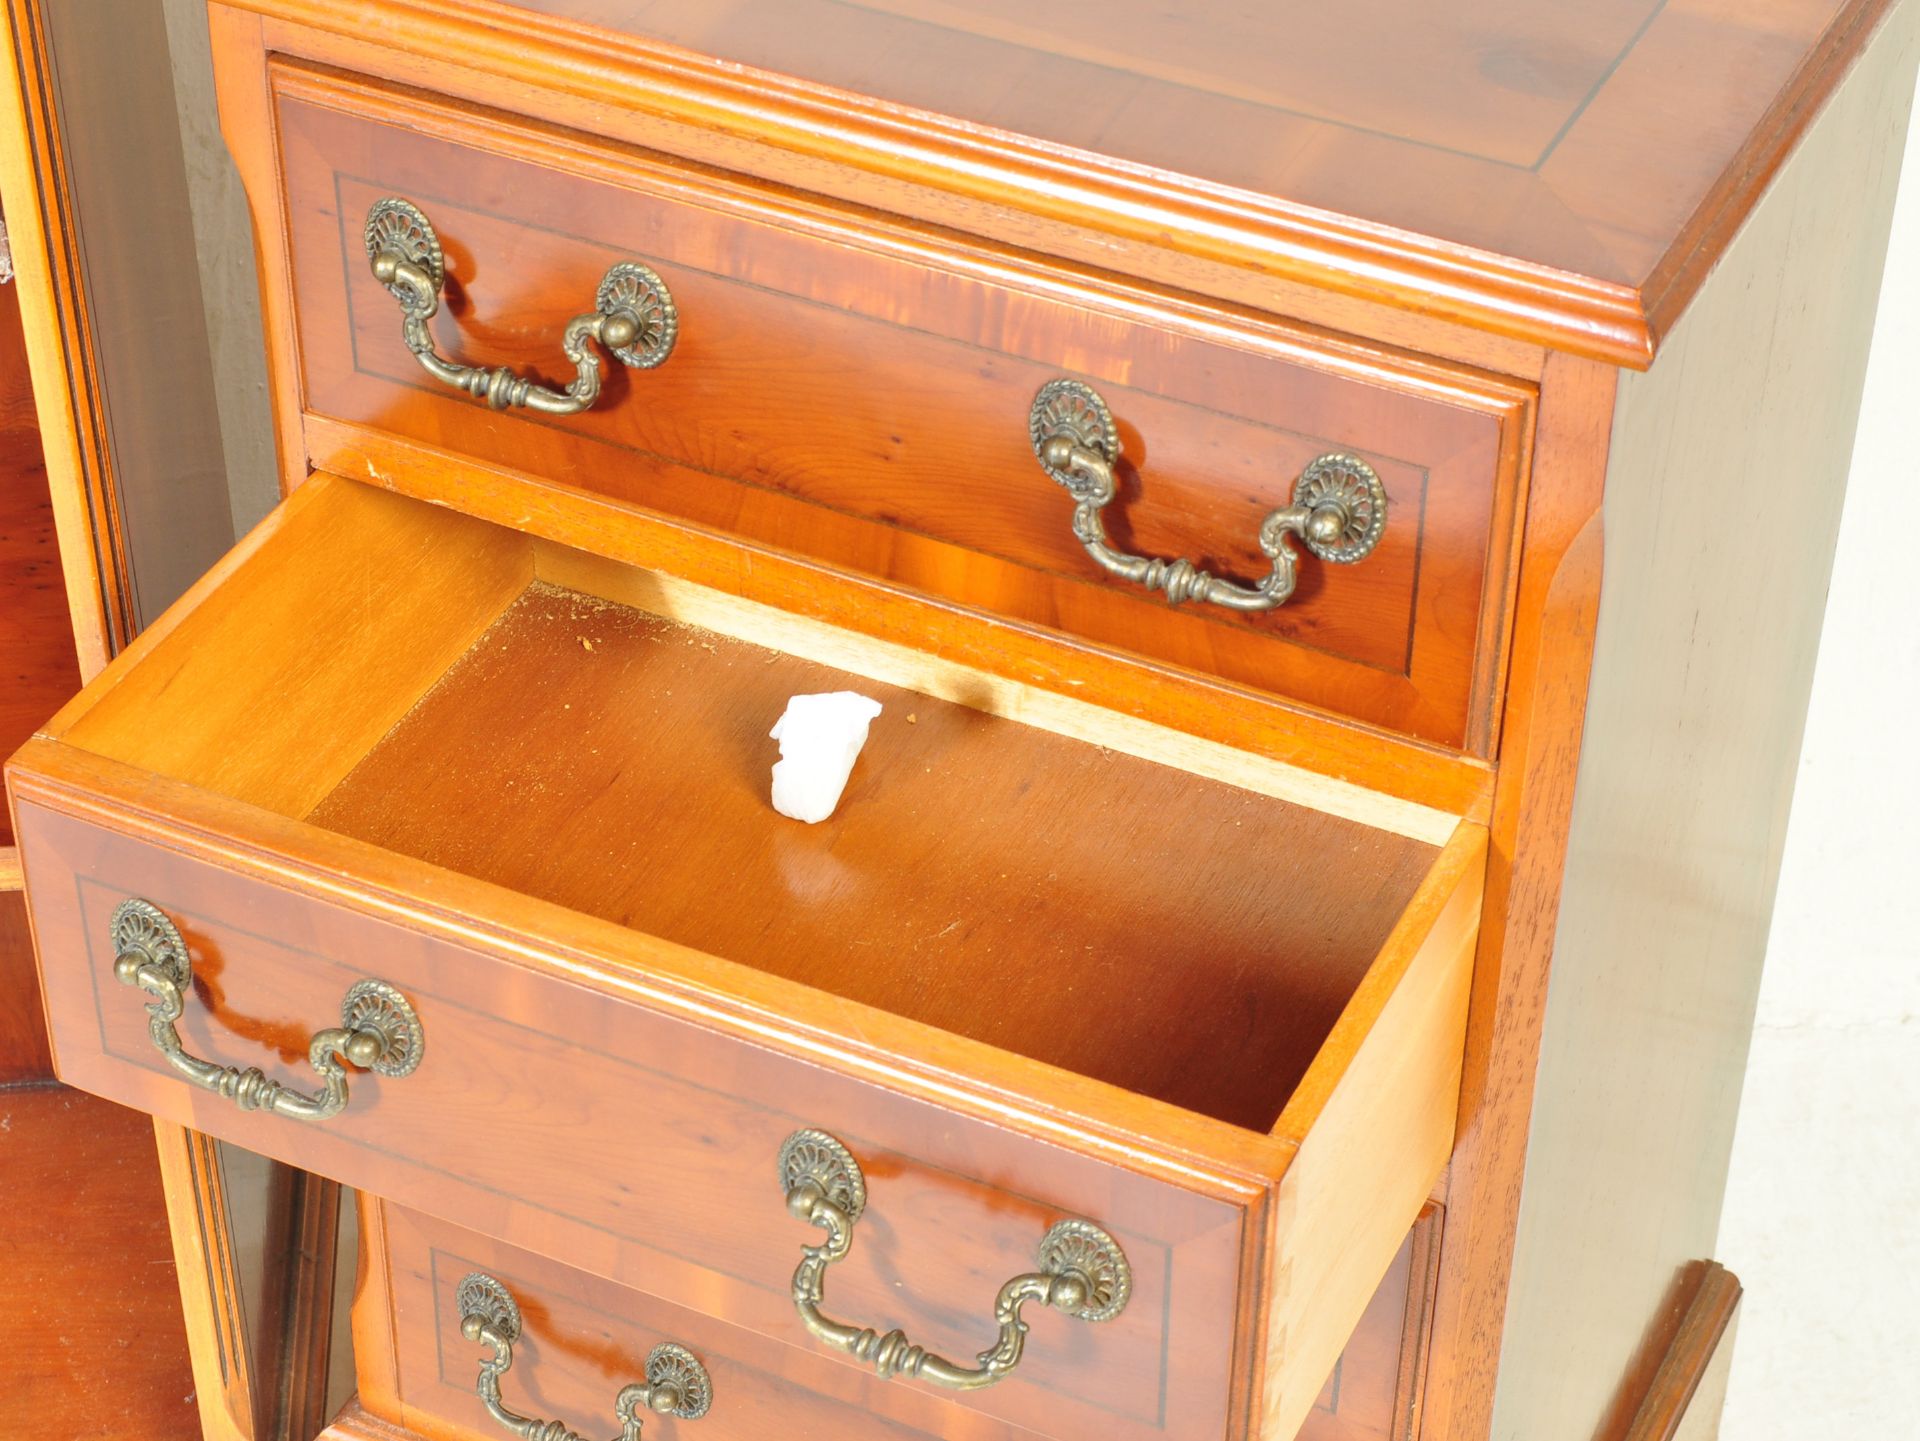 COLLECTION OF YEW WOOD REGENCY FURNITURE - Image 5 of 7